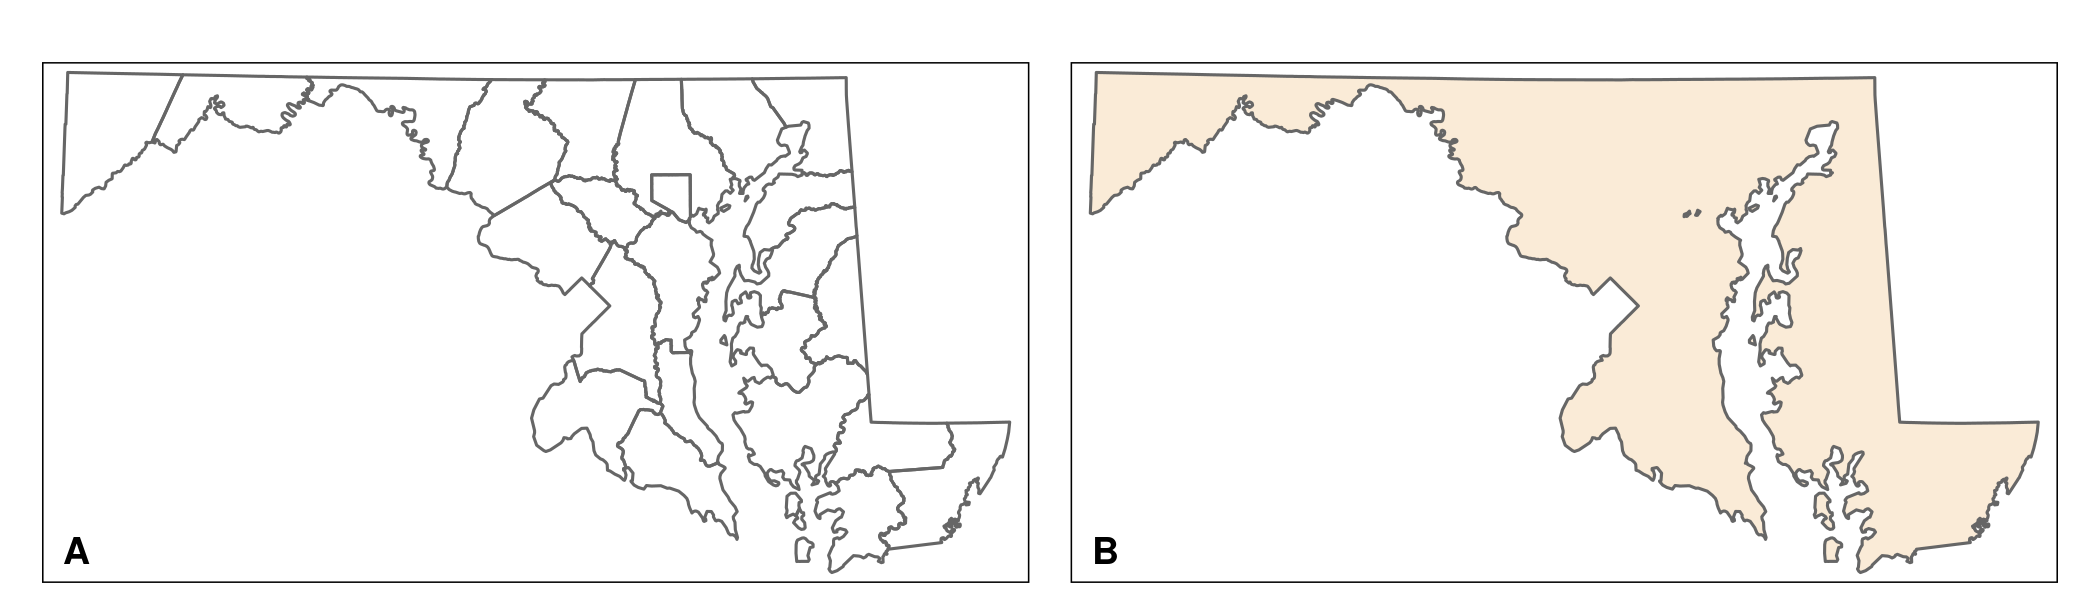 Two maps of Maryland showing political boundaries